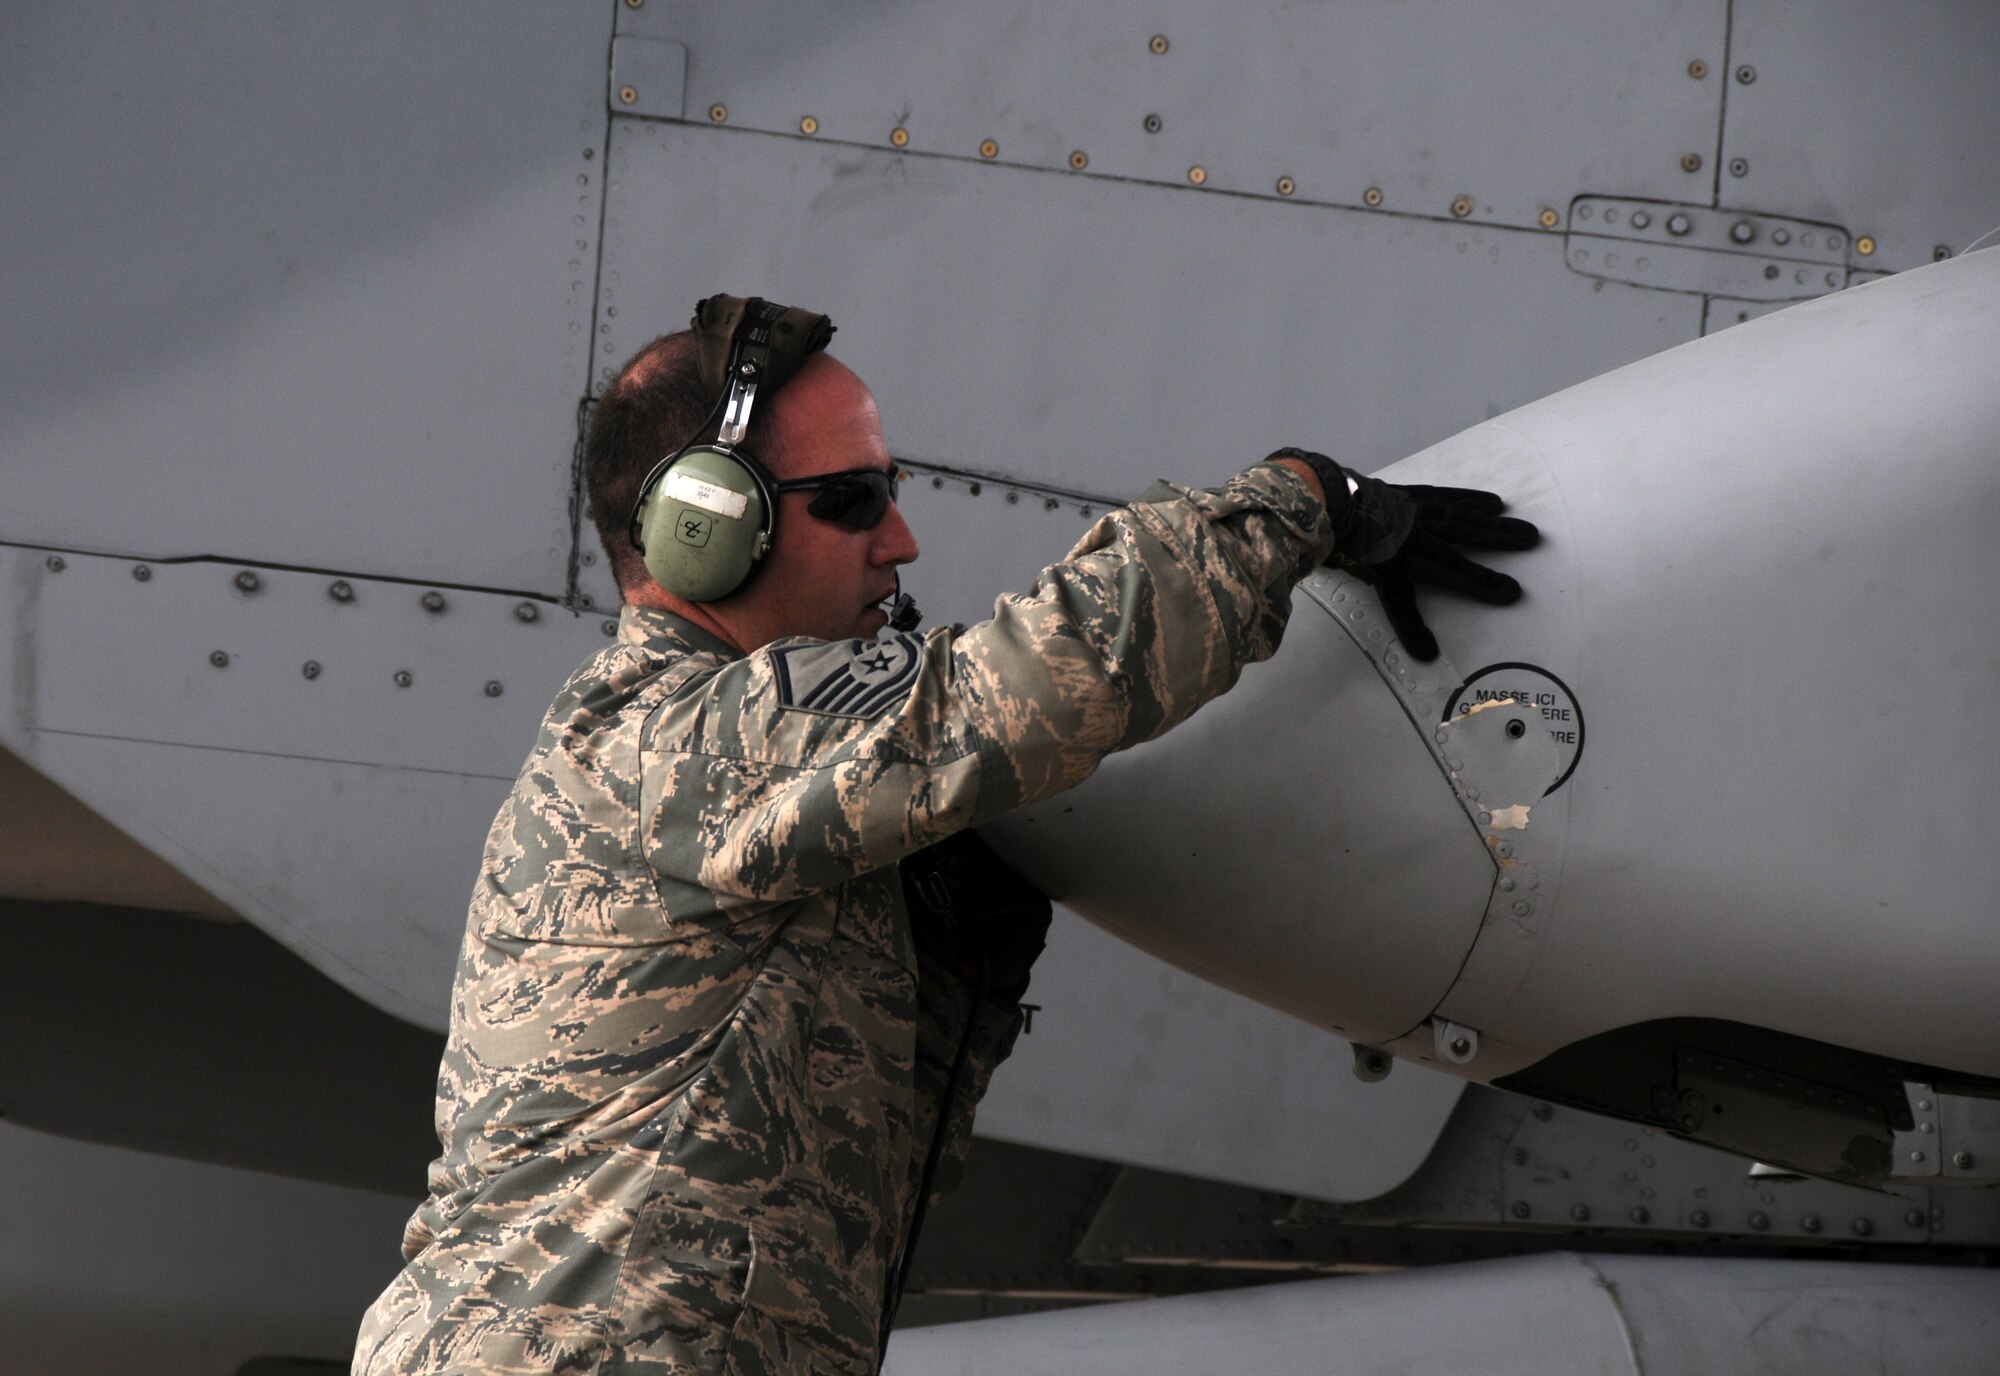 Master Sgt. Haden Key, a crew chief with the 188th Aircraft Maintenance Squadron, prepares an A-10C Thunderbolt II "Warthog" for departure at Ebbing Air National Guard Base, Fort Smith, Arkansas, April 2, 2014. Tail No. 586 was delivered to Moody Air Force Base, Georgia, as part of the 188th Fighter Wing's conversion from A-10s to a remotely piloted aircraft, intelligence and targeting mission. (U.S. Air National Guard photo by Airman 1st Class Cody Martin/Released)